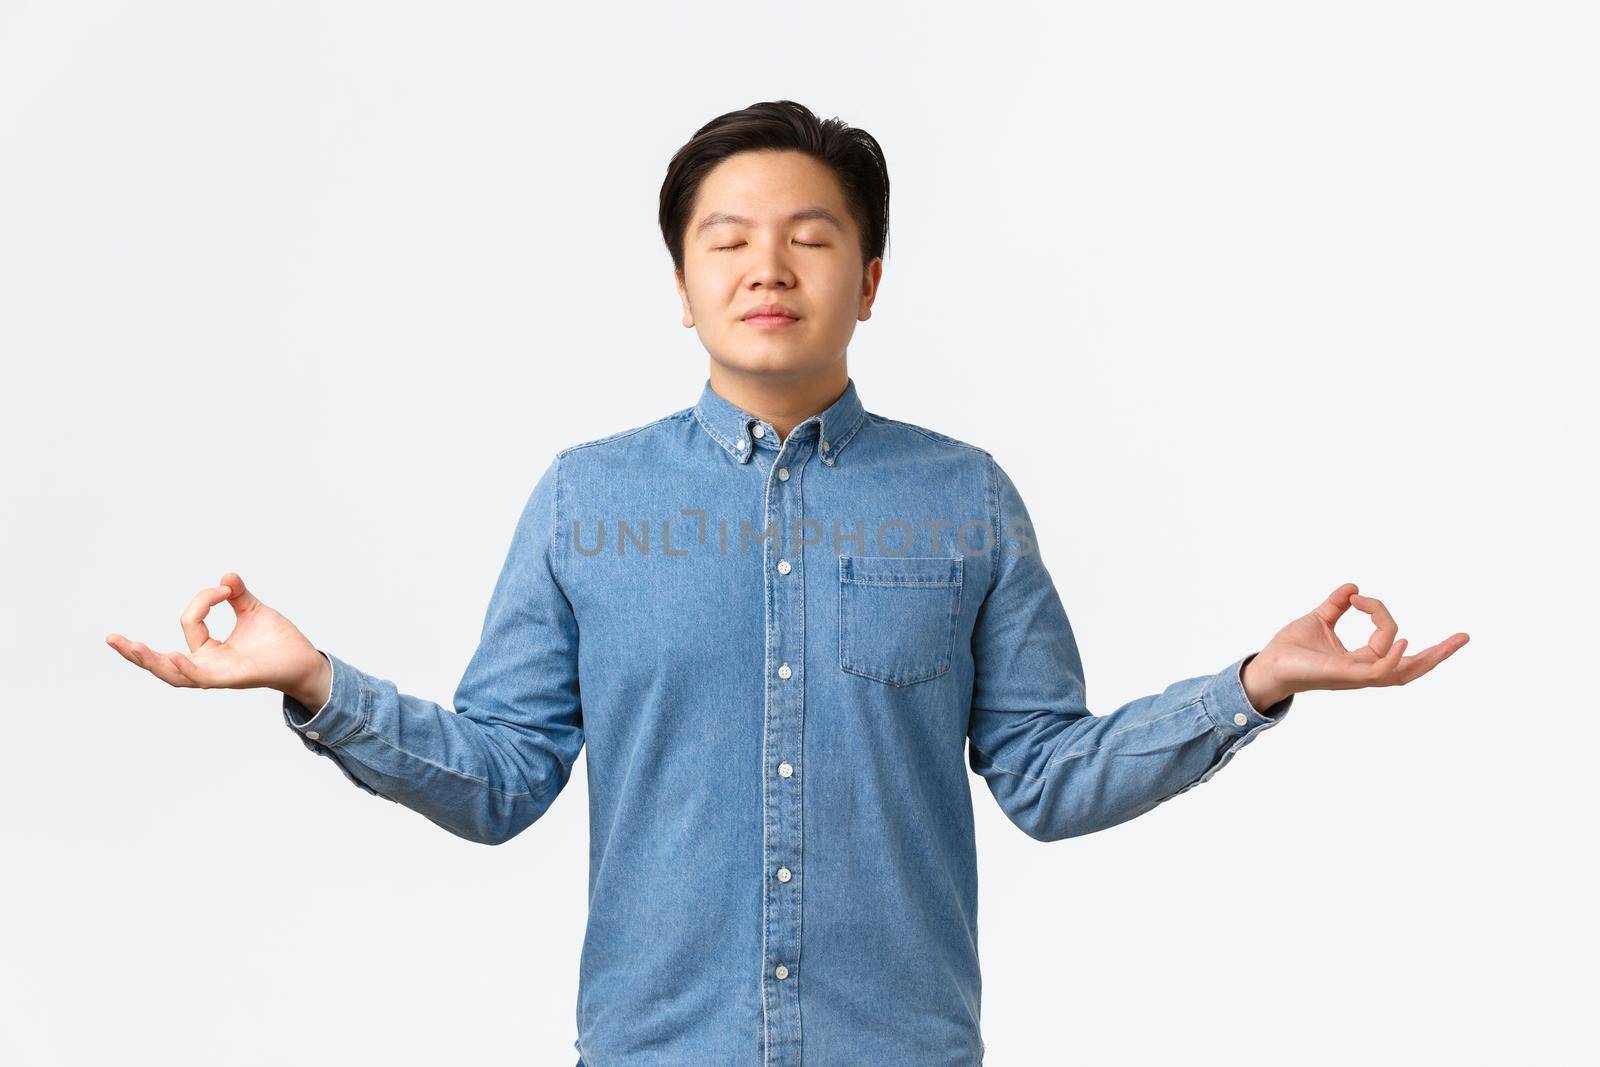 Relieved and relaxed smiling asian man with closed eyes meditating, feeling peaceful and happy, release stress, standing over white background with hands spread sideways in nirvana pose.